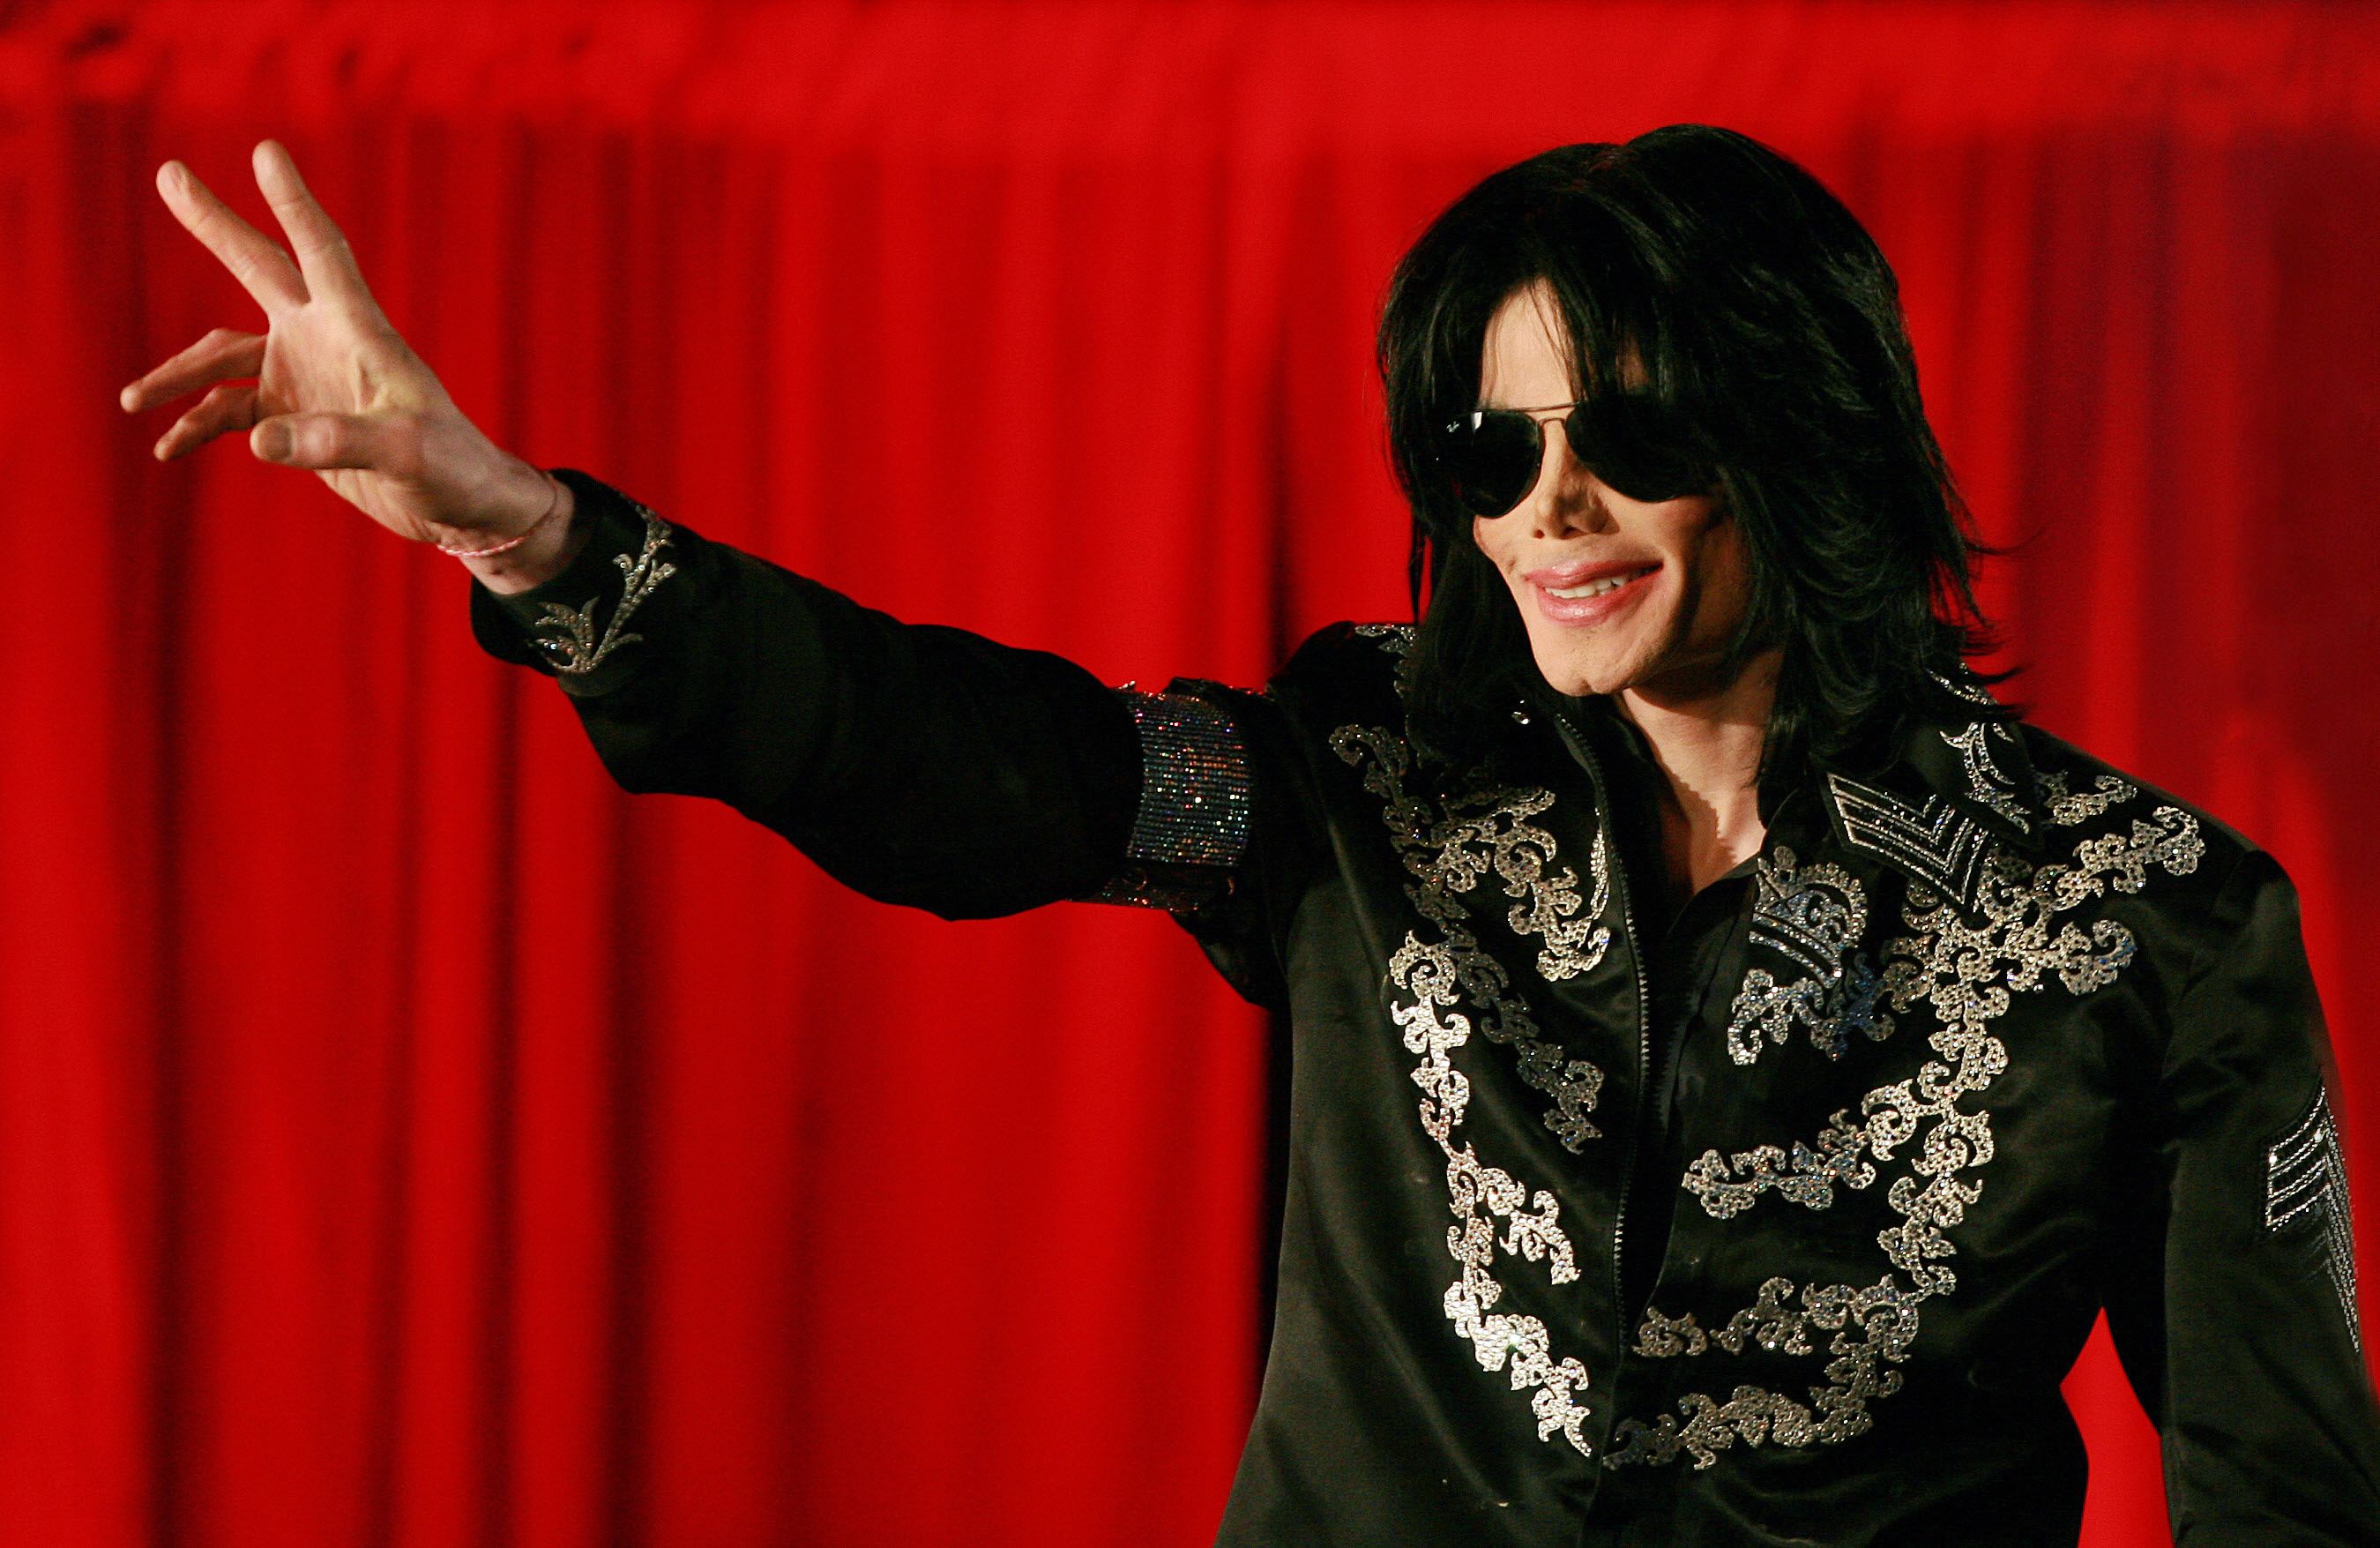 32-facts-about-prince-michael-jackson